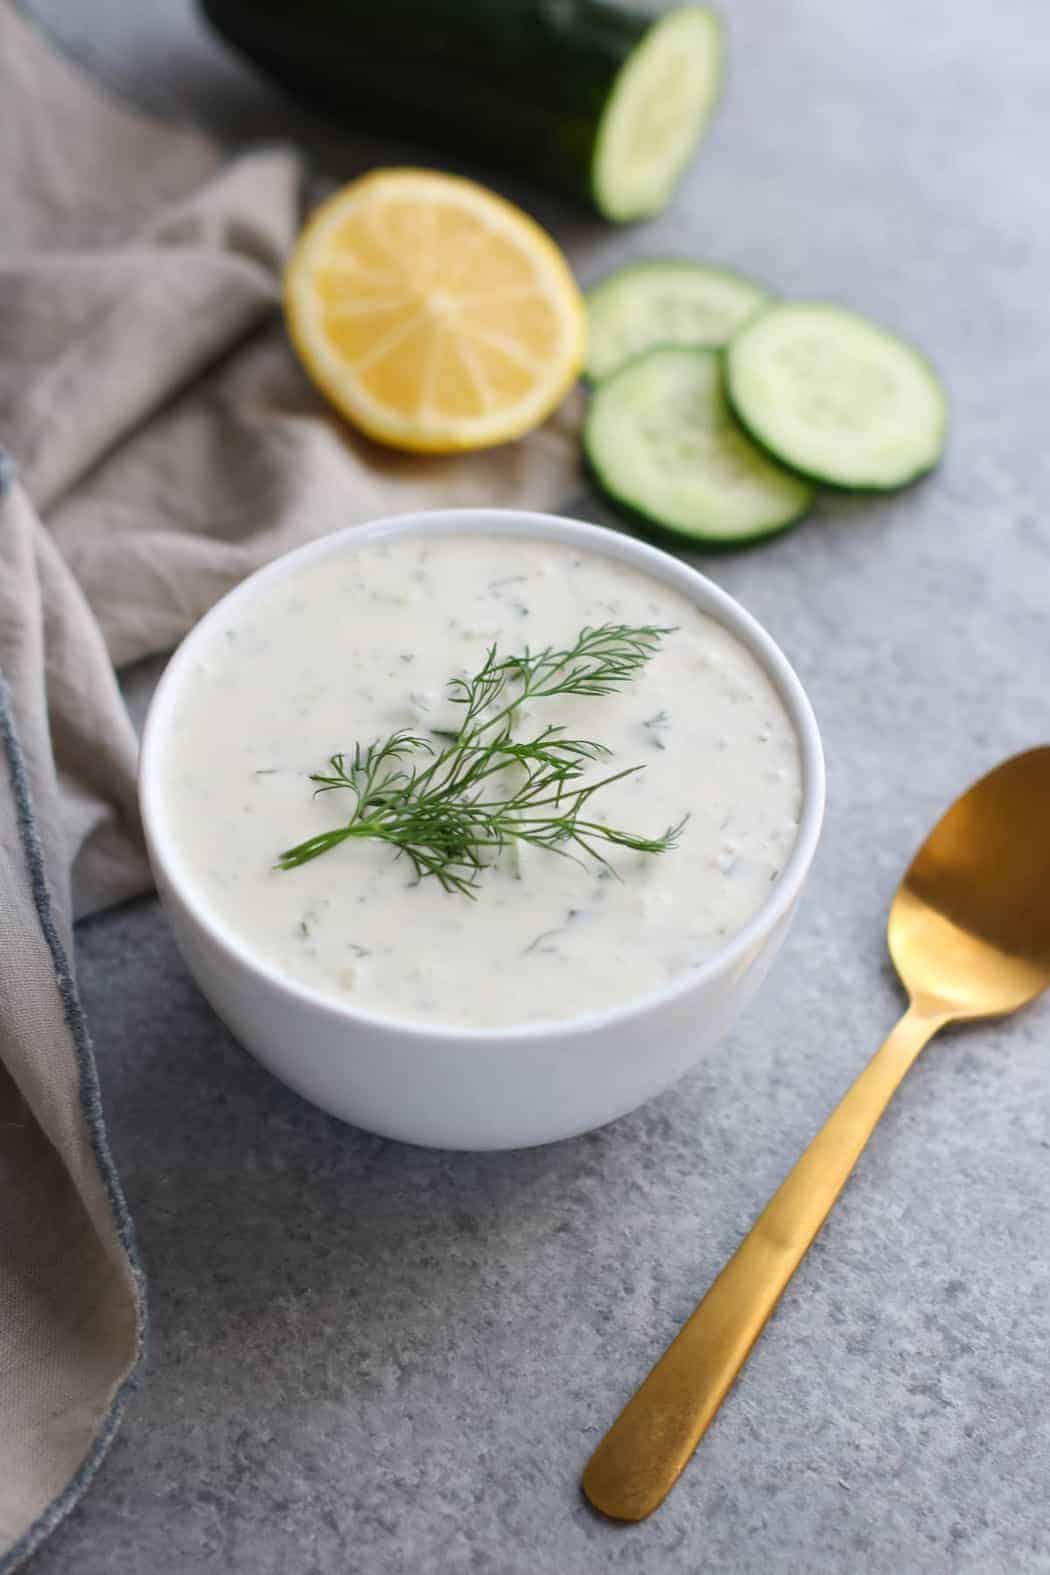 Paleo Tzatziki Sauce is dairy-free, Whole30-friendly and vegan-optional. | whole30 sauce recipes | dairy free dips | vegan dip recipe | paleo dip recipes | homemade tzatziki sauce | healthy tzatziki sauce || The Real Food Dietitians #whole30recipe #whole30approved #tzatzikisauce